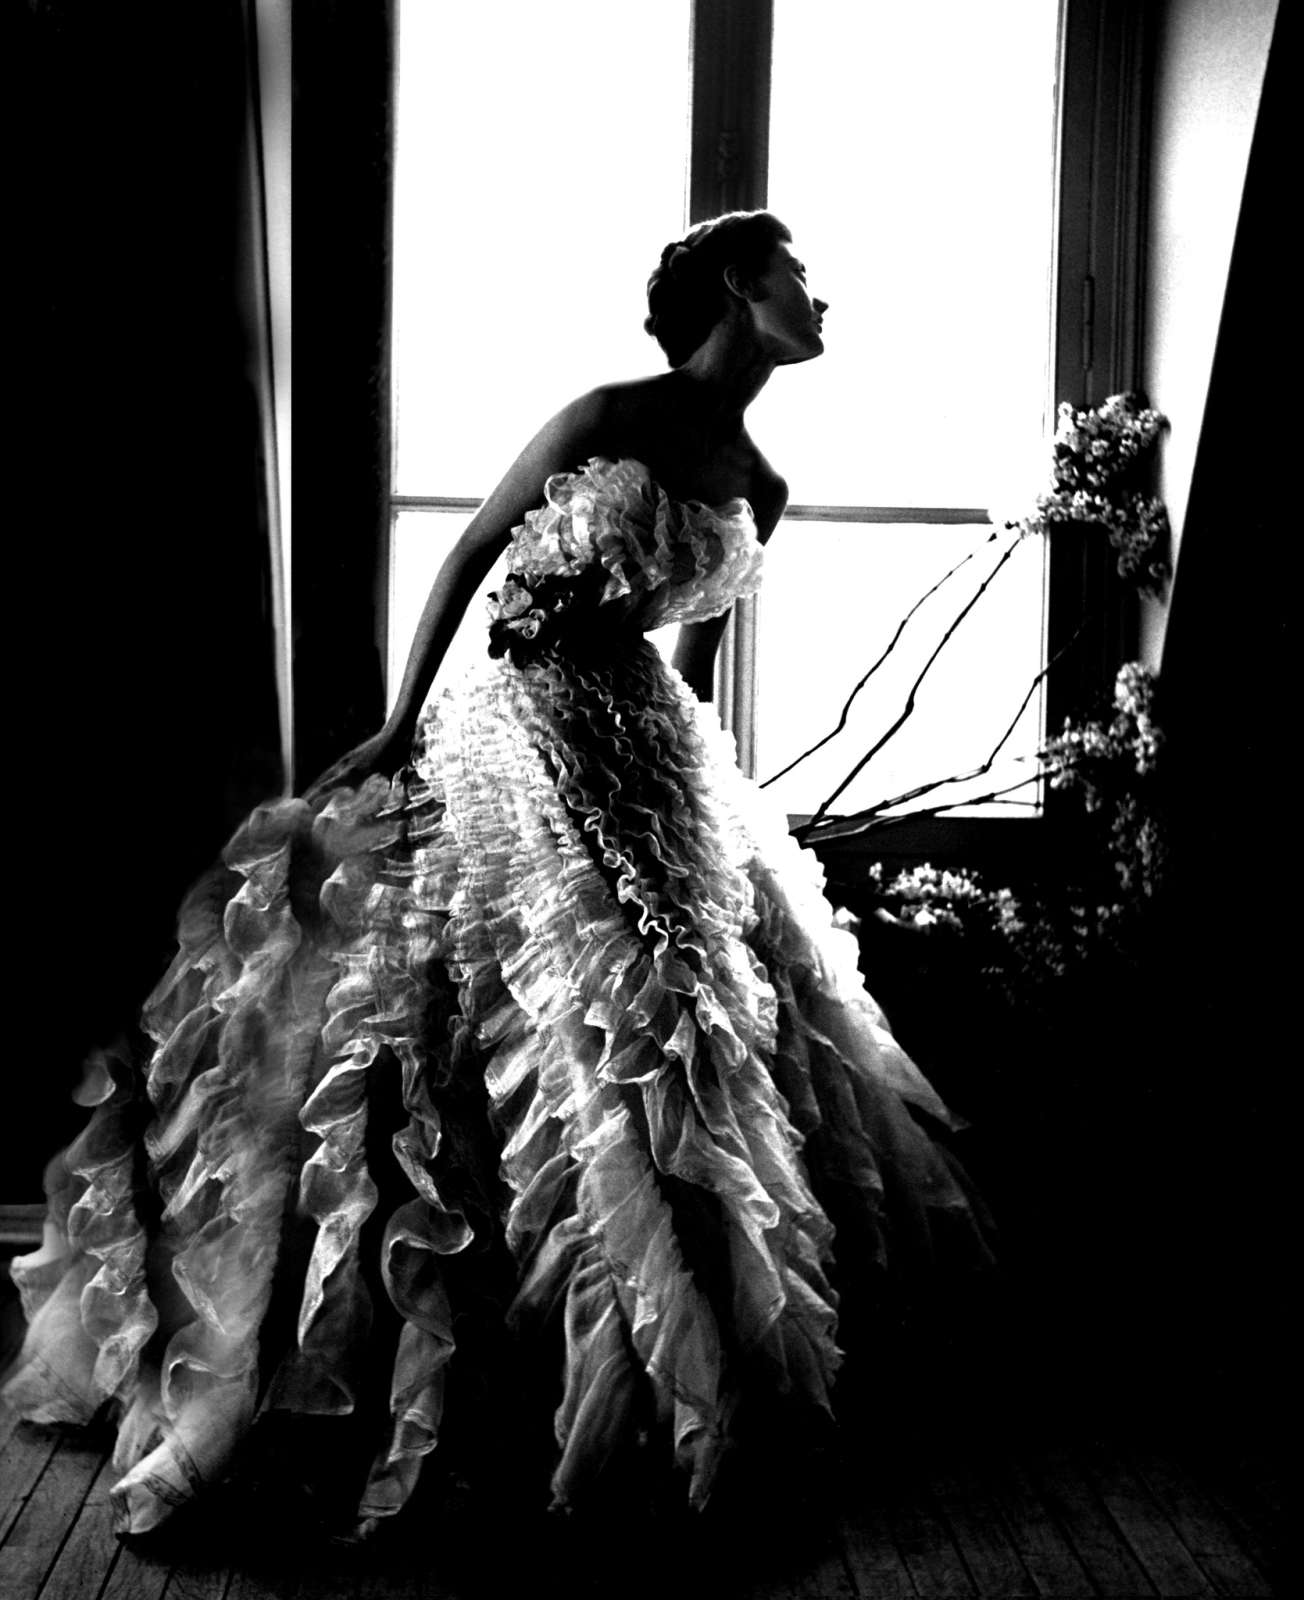 c.1953 Christian Dior Couture Silver & Sequin Fantasty Gown